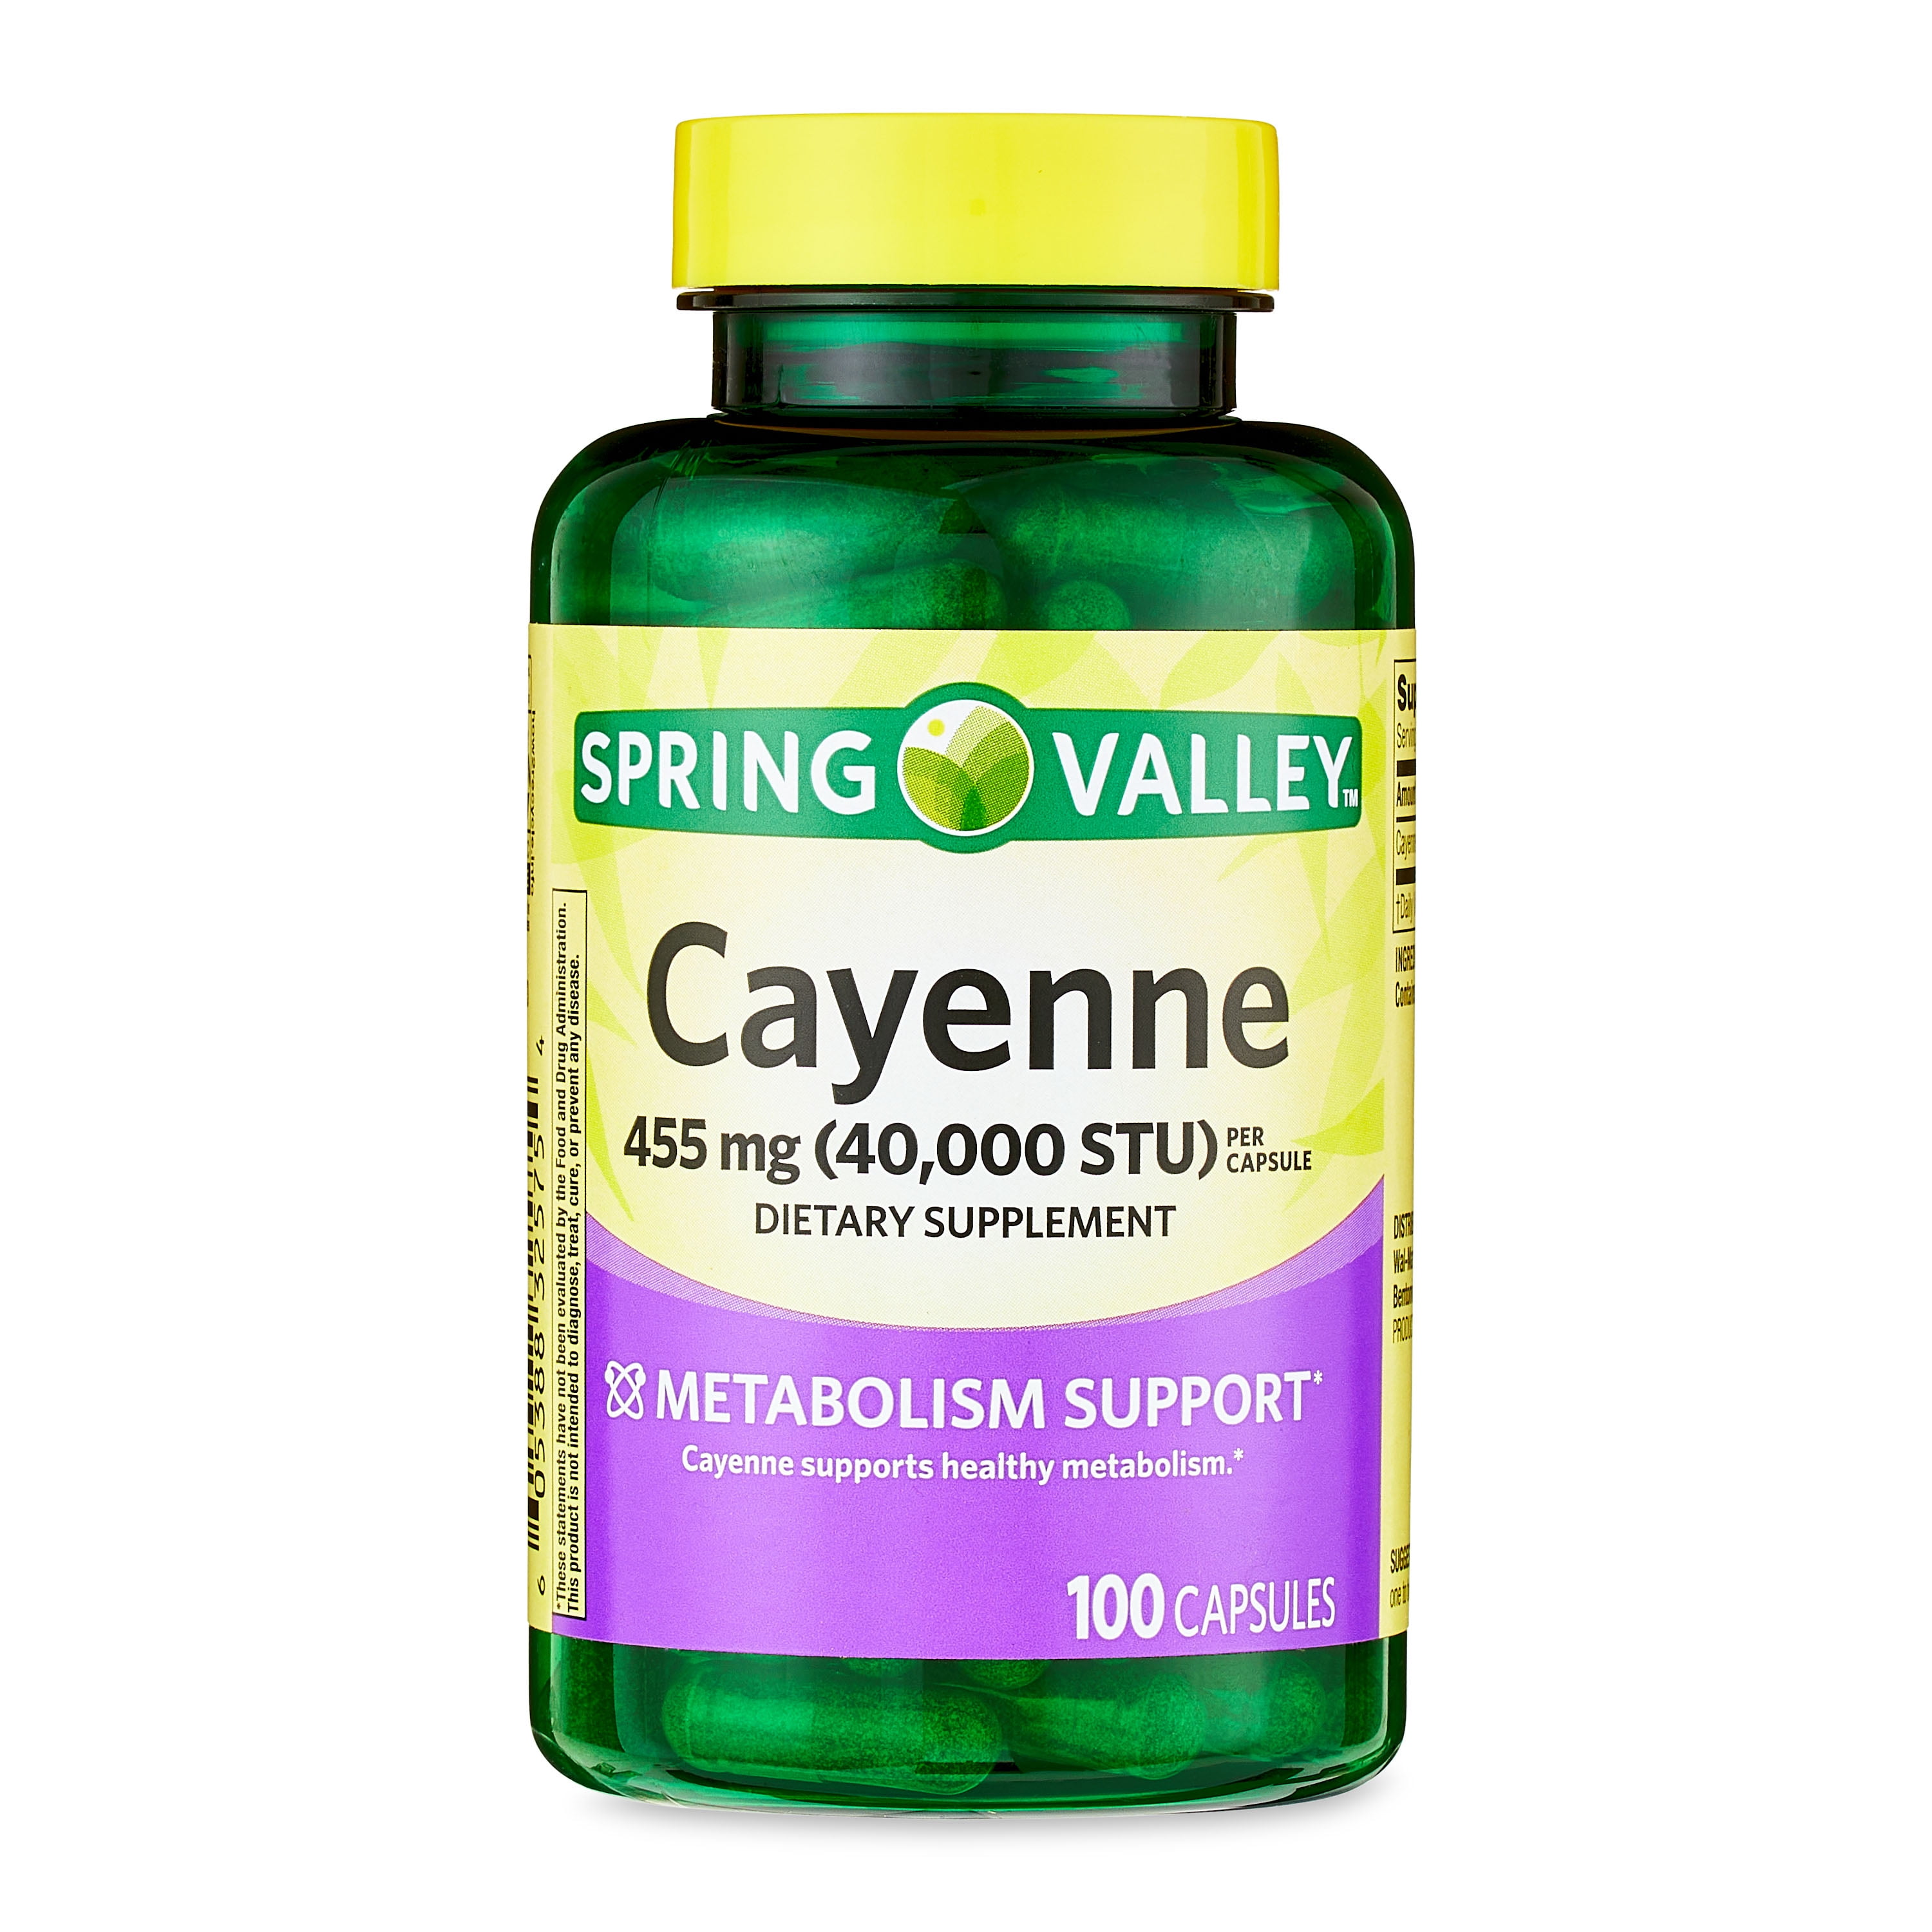 Spring Valley Cayenne Capsules Dietary Supplement, 455 mg, 100 Count